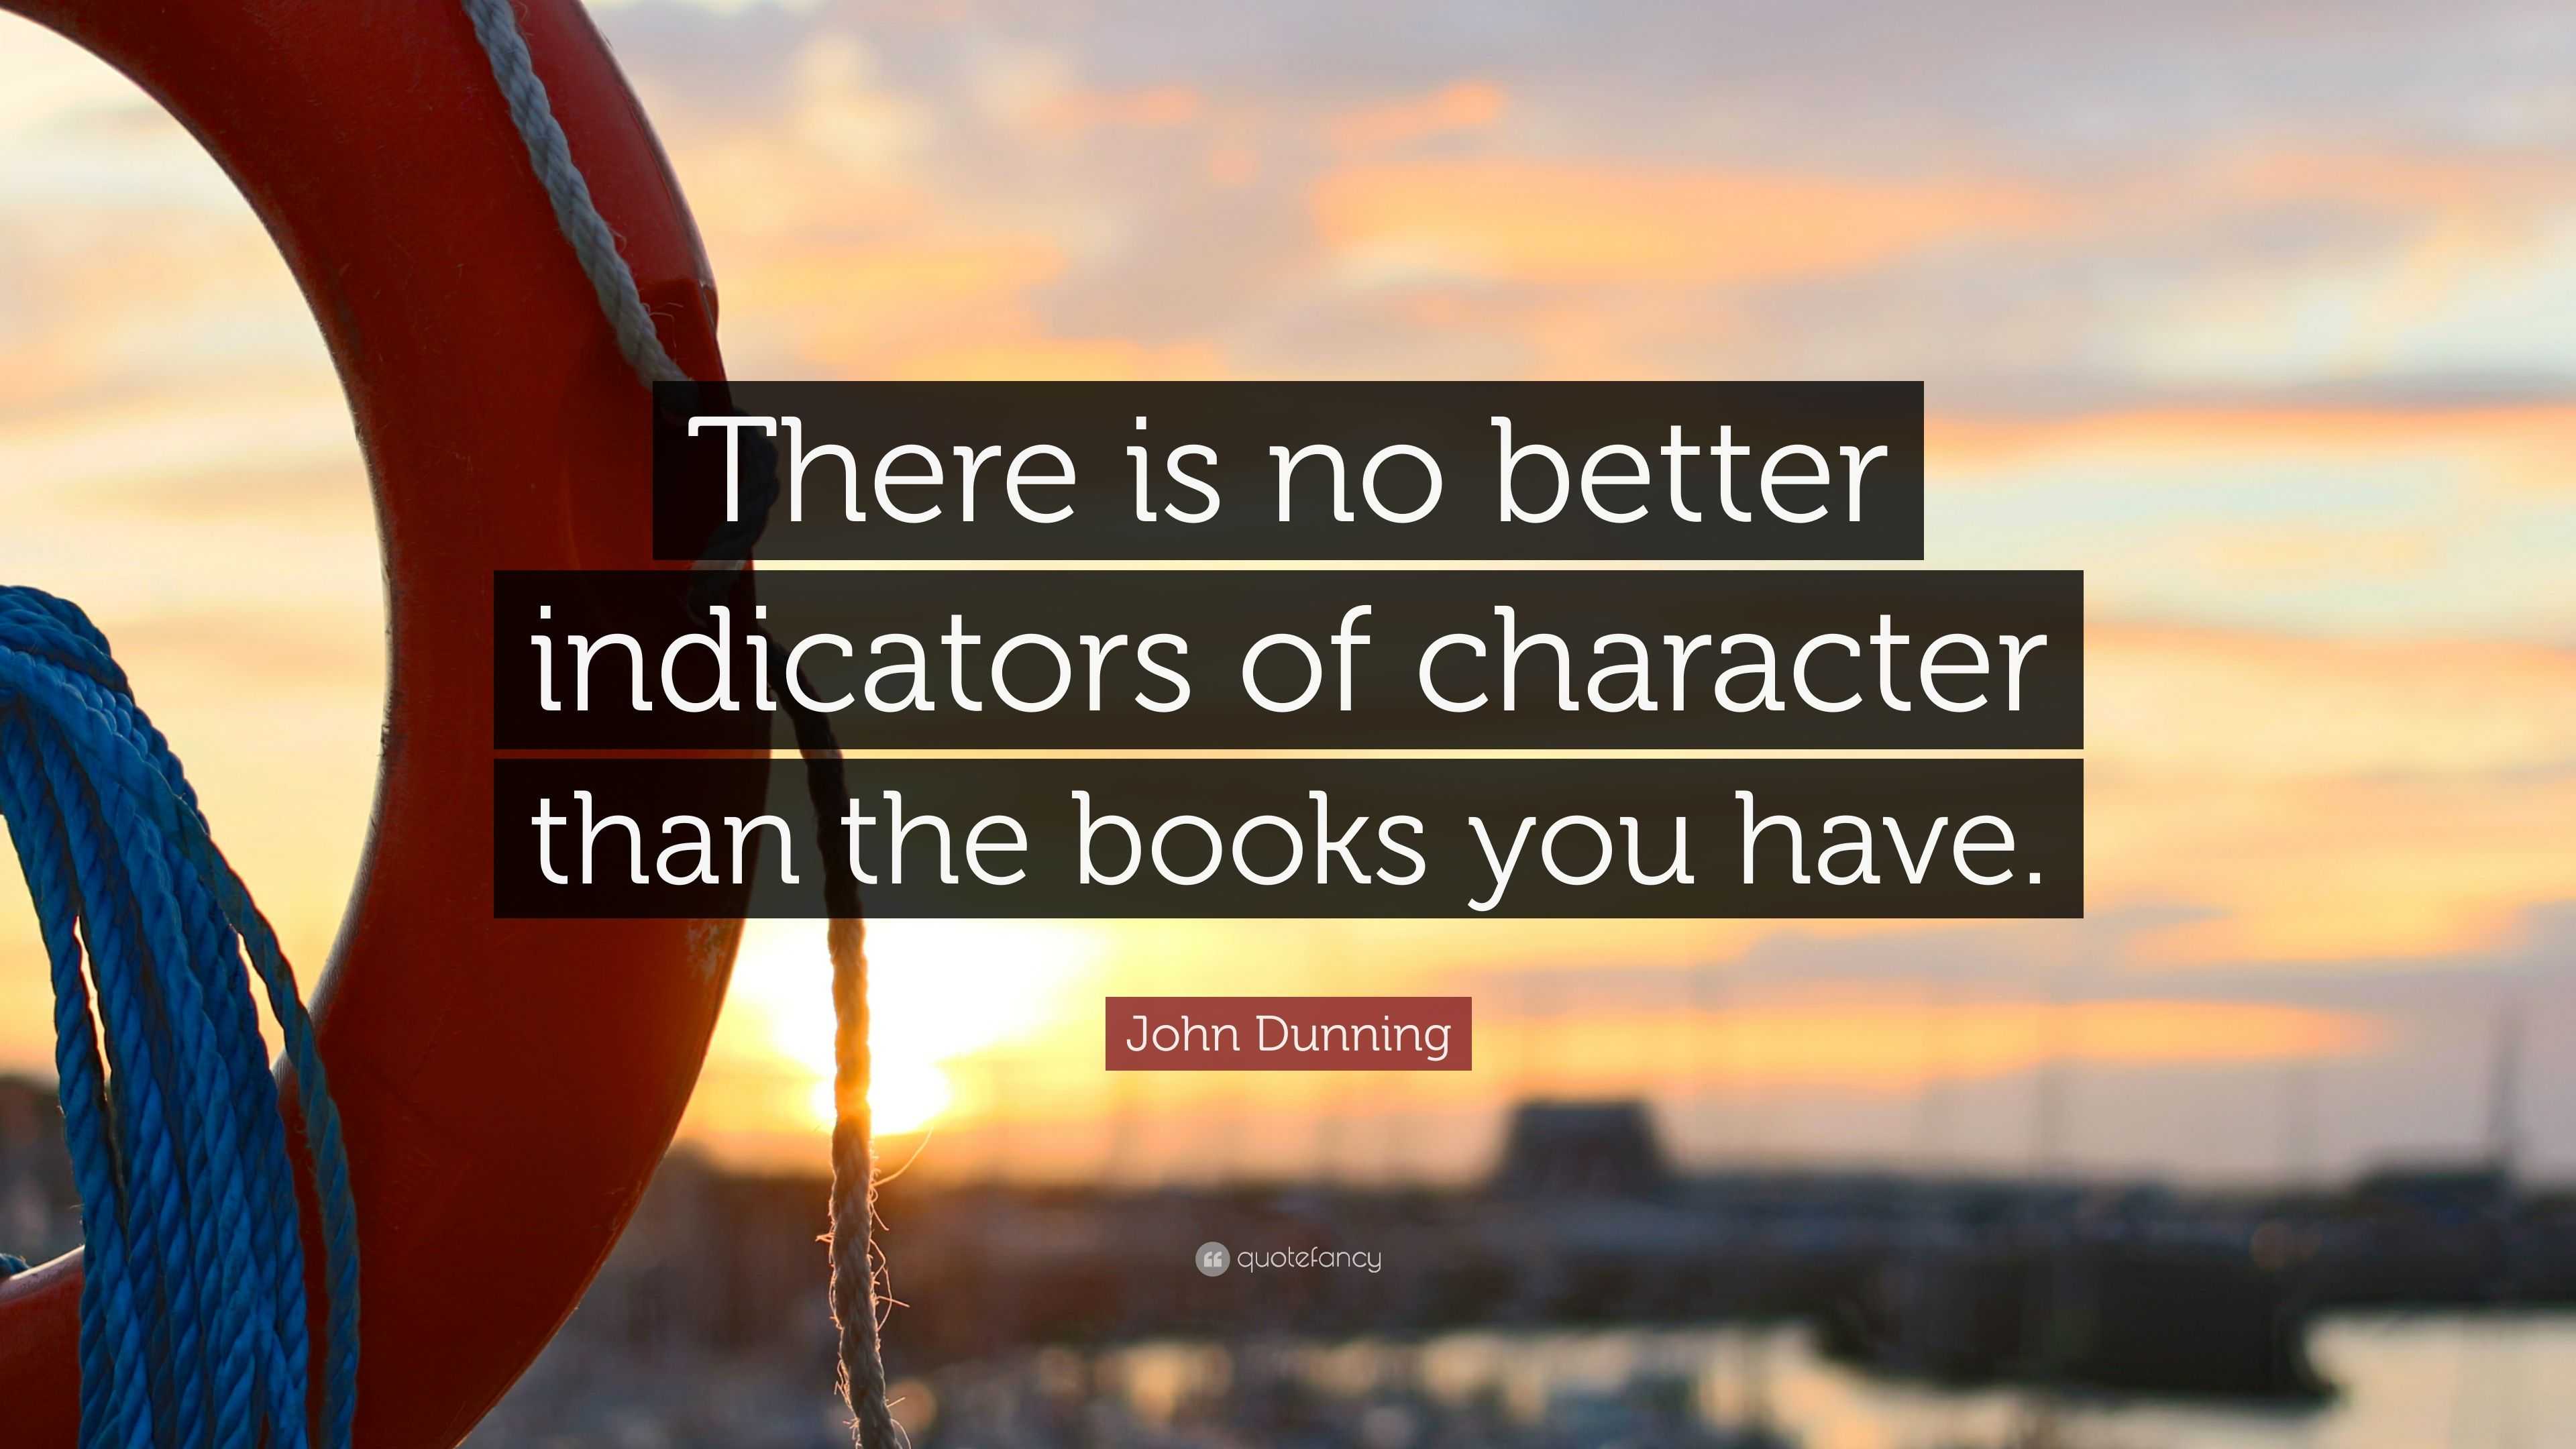 John Dunning Quote: “There is no better indicators of character than ...